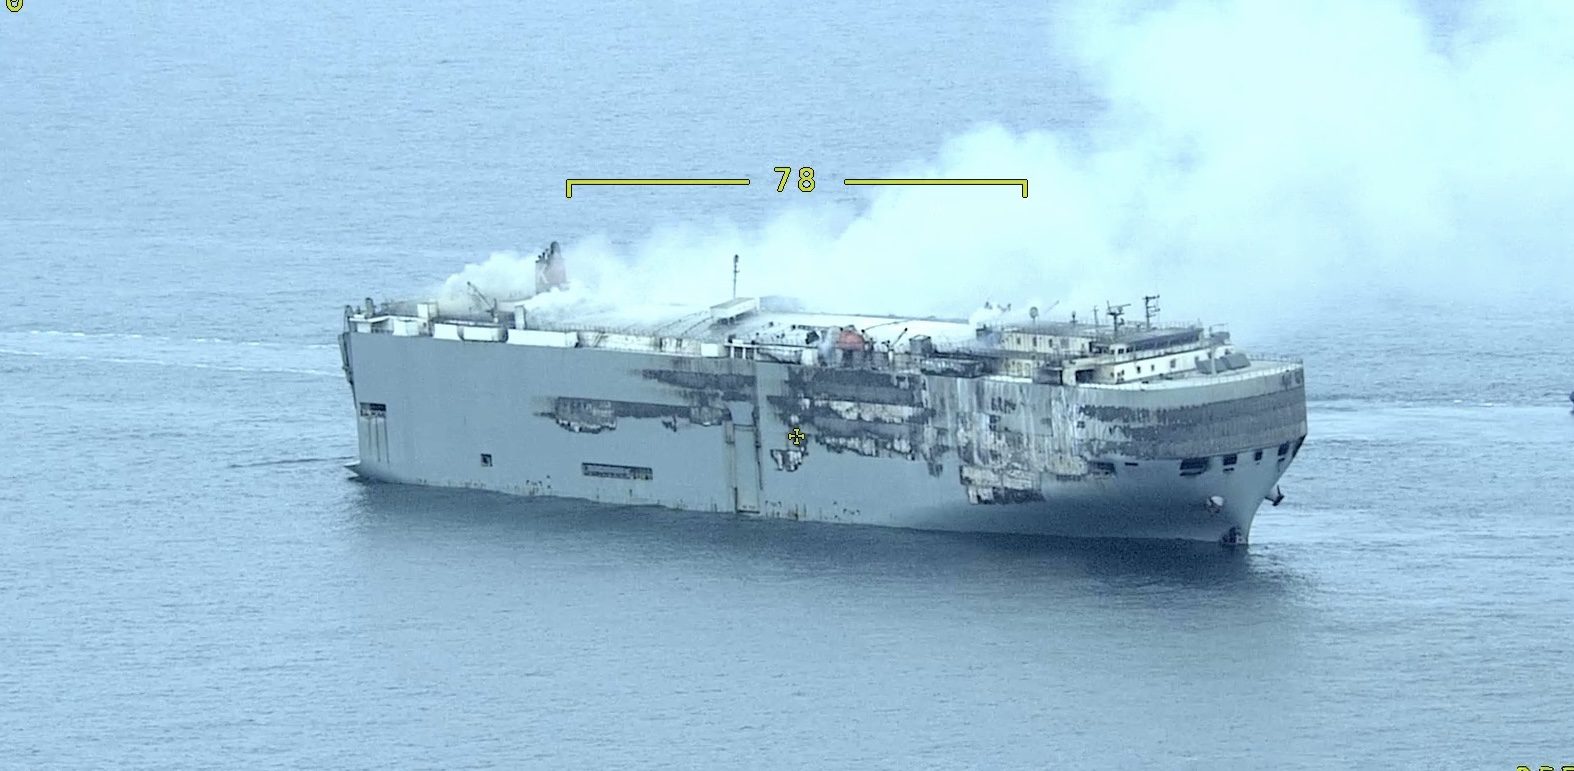 “K” Line Confirms Nearly 500 Electric Vehicles on Burning Car Carrier in the North Sea